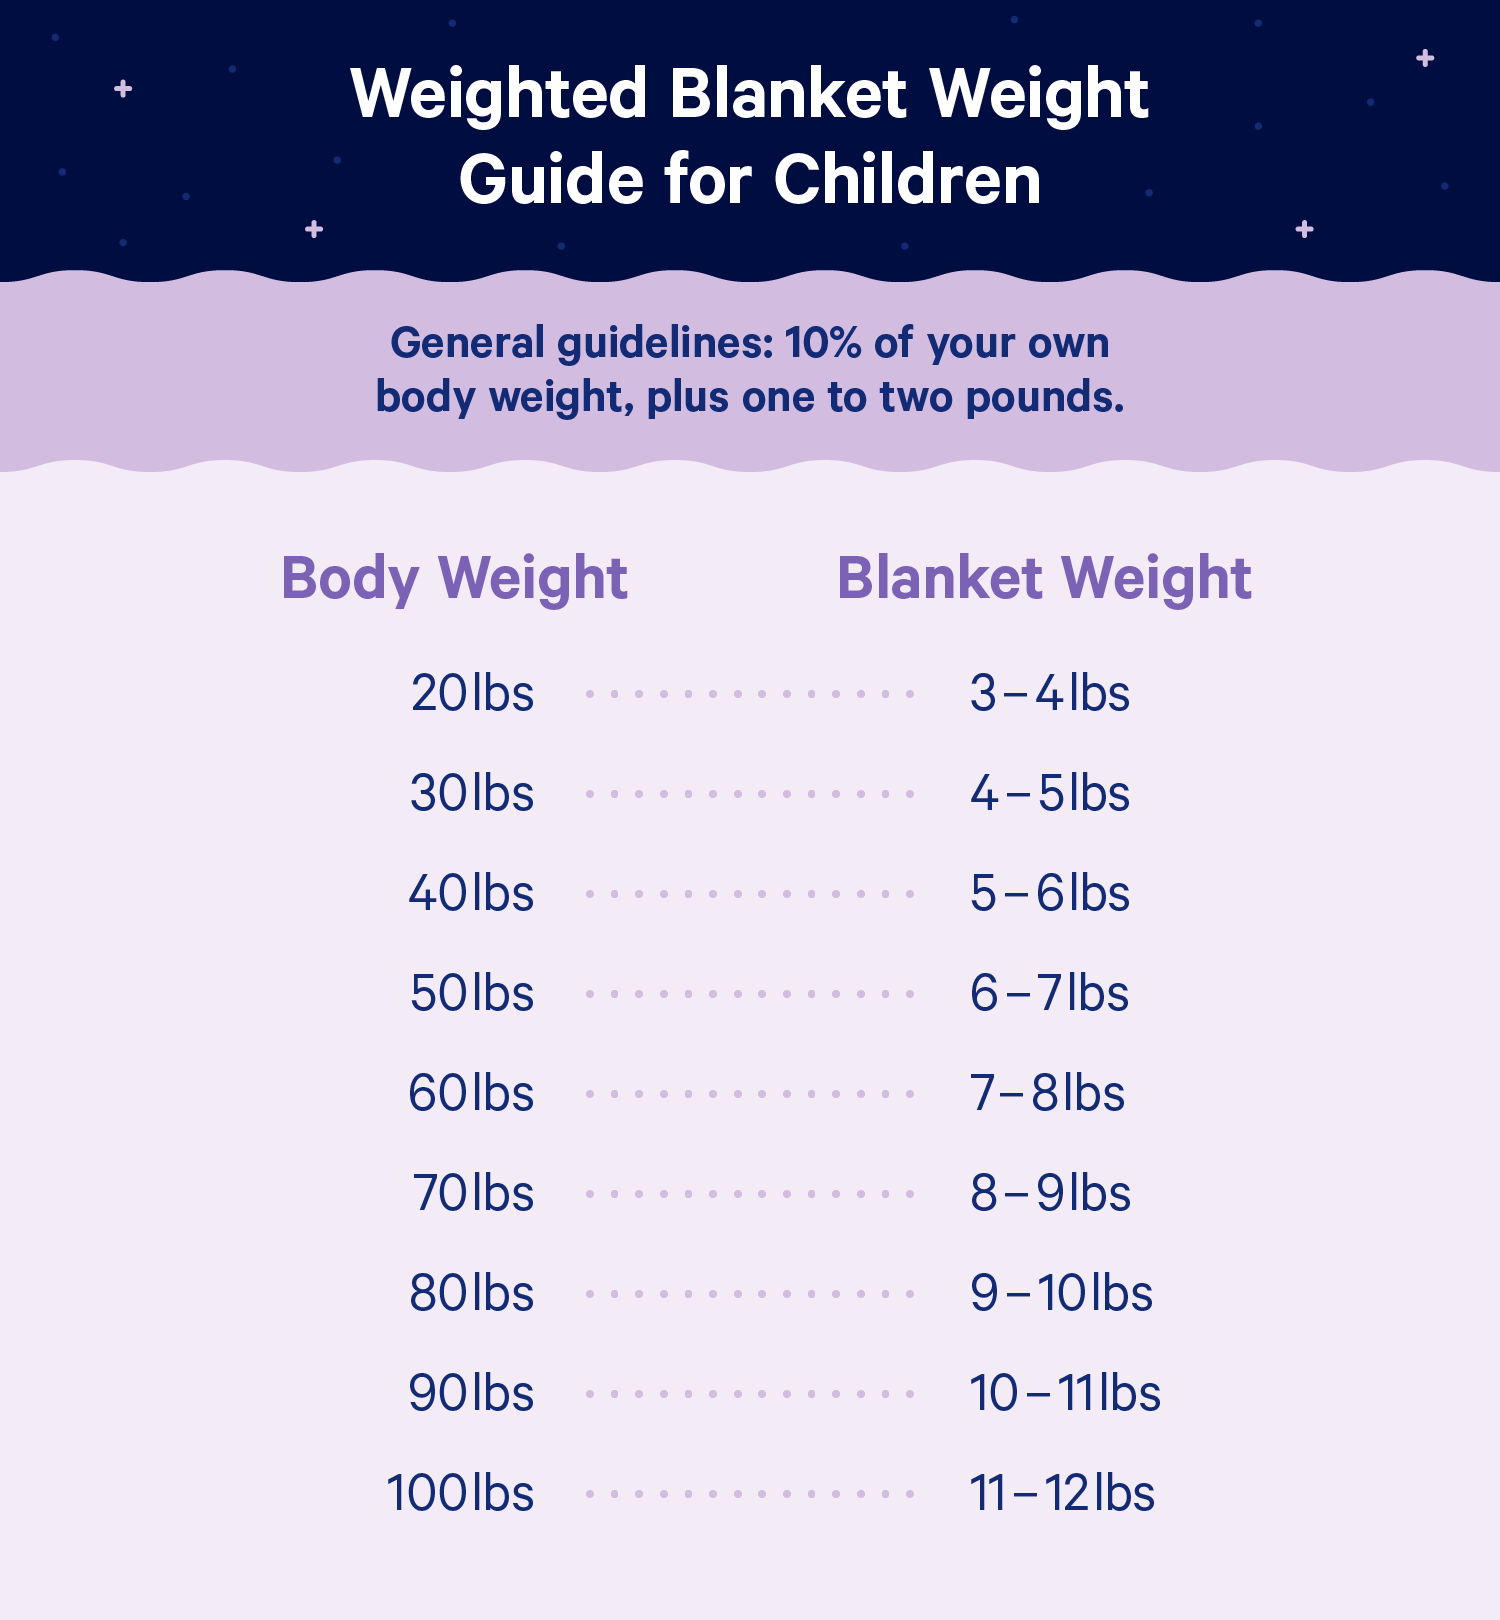 A chart showing weighted blanket recommendations based on weight for children. Information shown below.